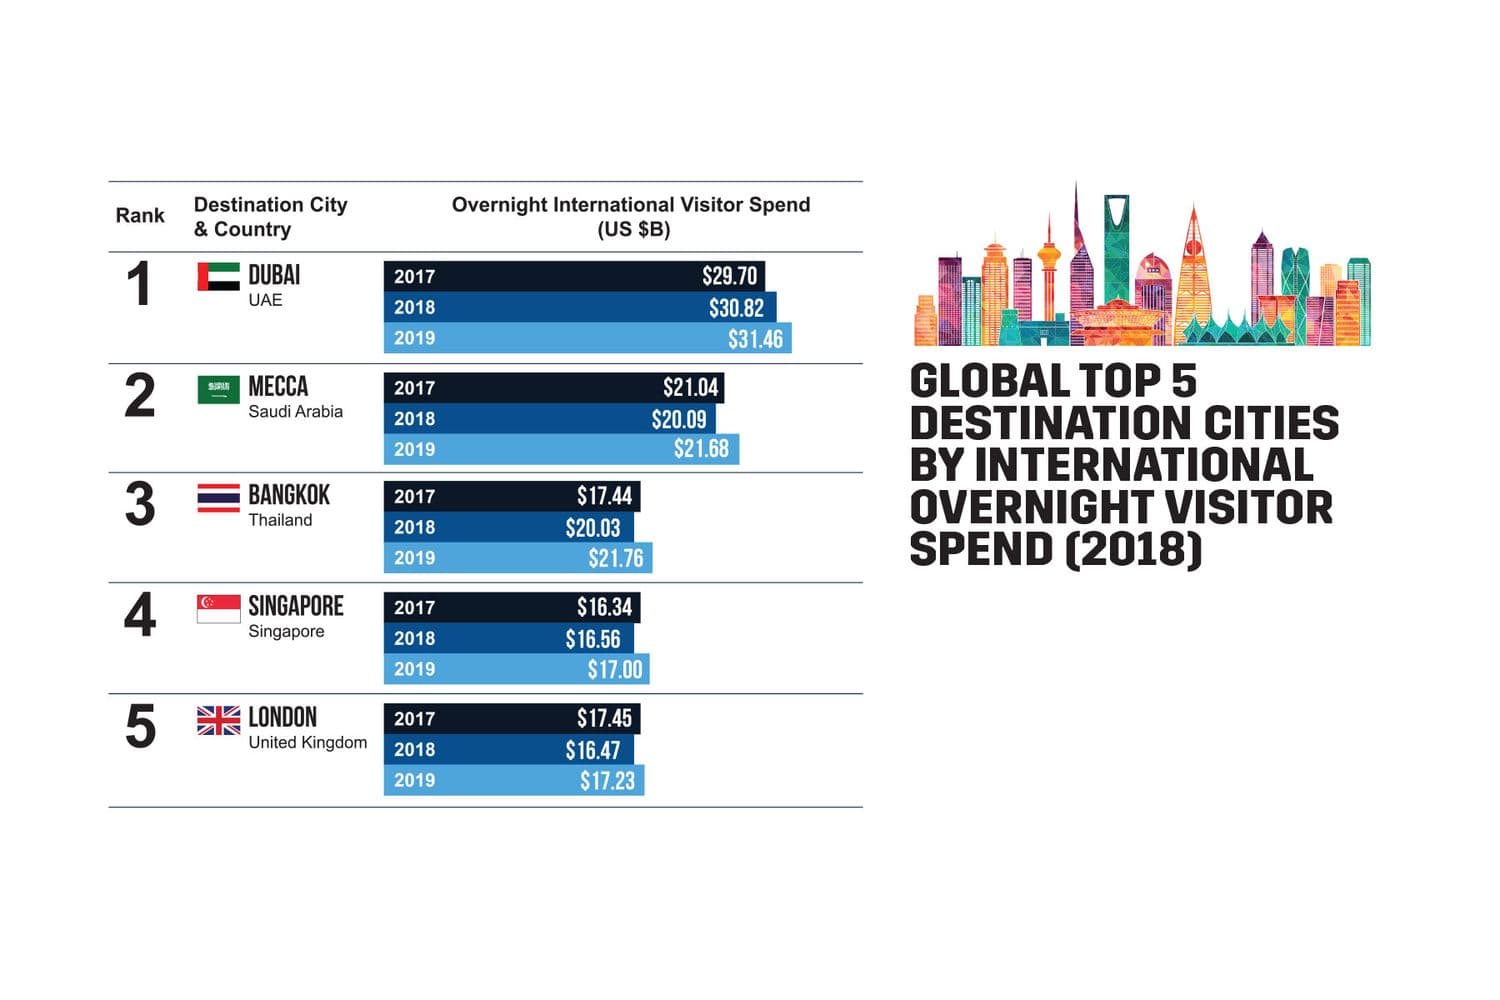 Global Top 5 Destination Cities by International Overnight Visitor Spend (2018)